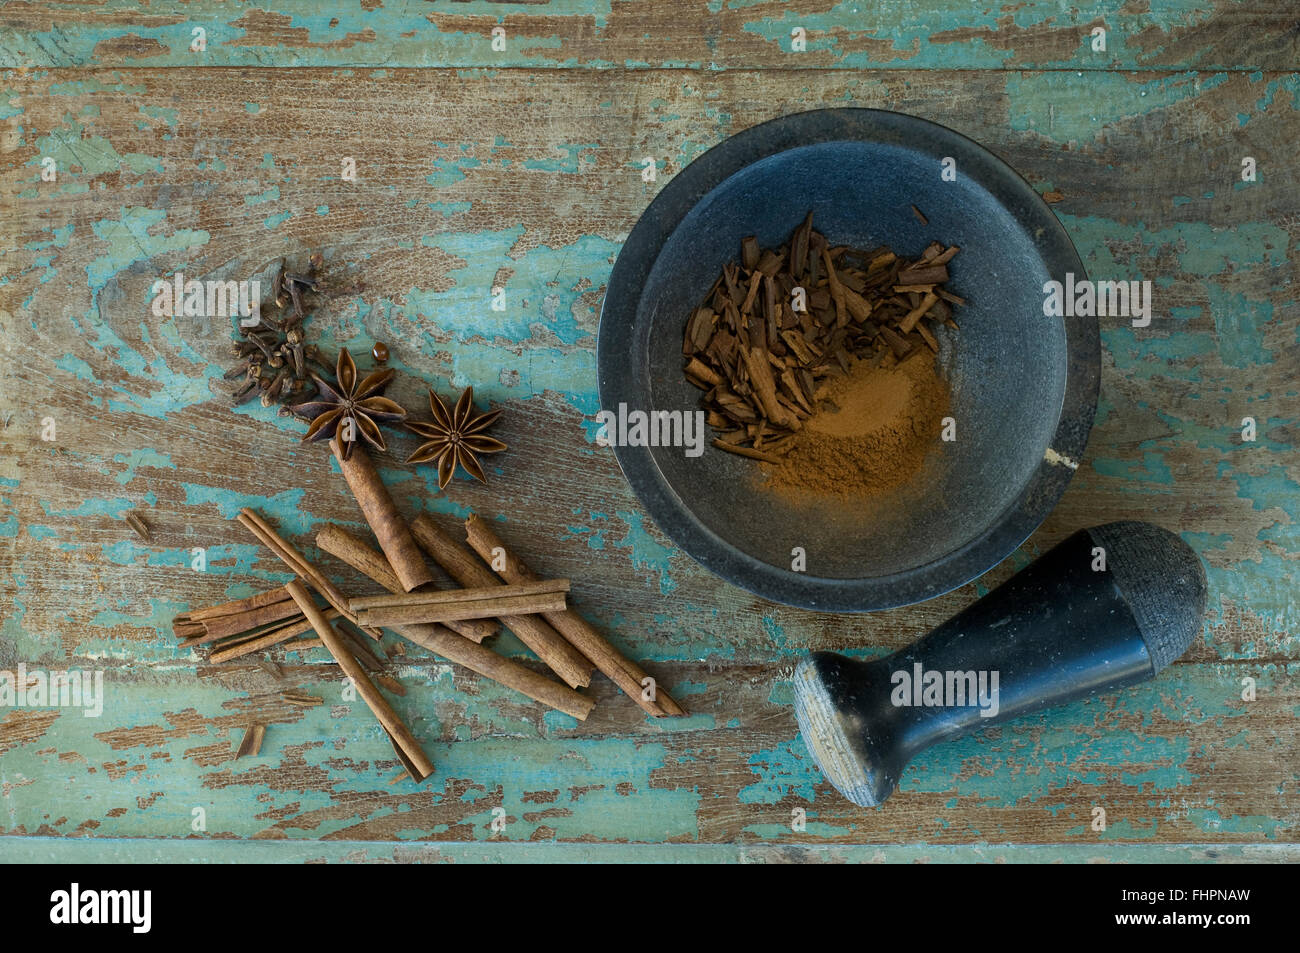 Christmas spices and mortar on wood Stock Photo